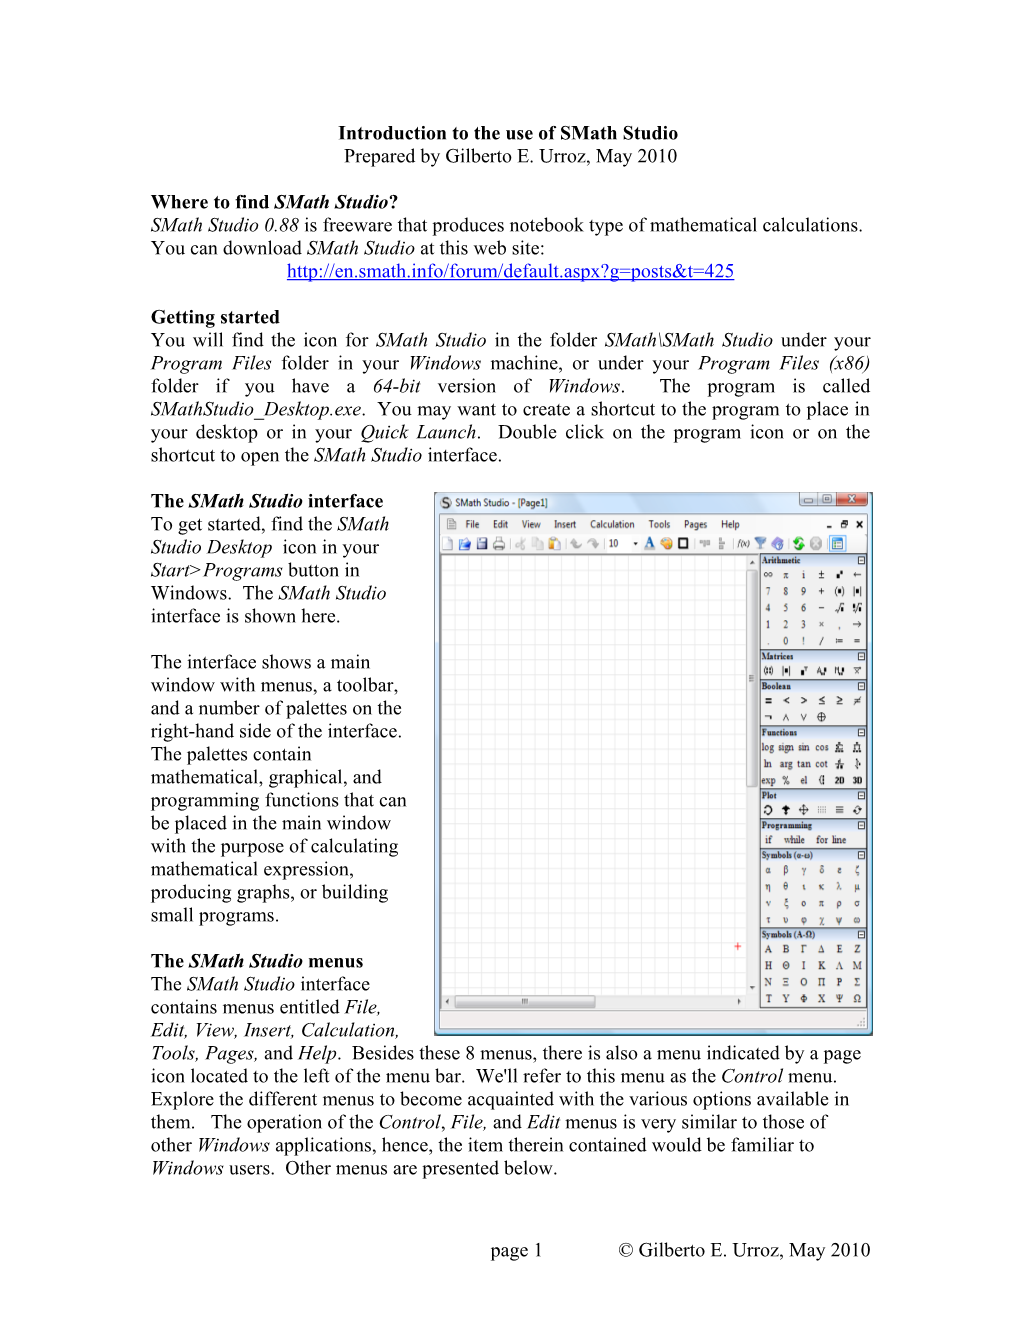 Introduction to the Use of Smath Studio Prepared by Gilberto E. Urroz, May 2010 Where to Find Smath Studio? Smath Studio 0.88 Is